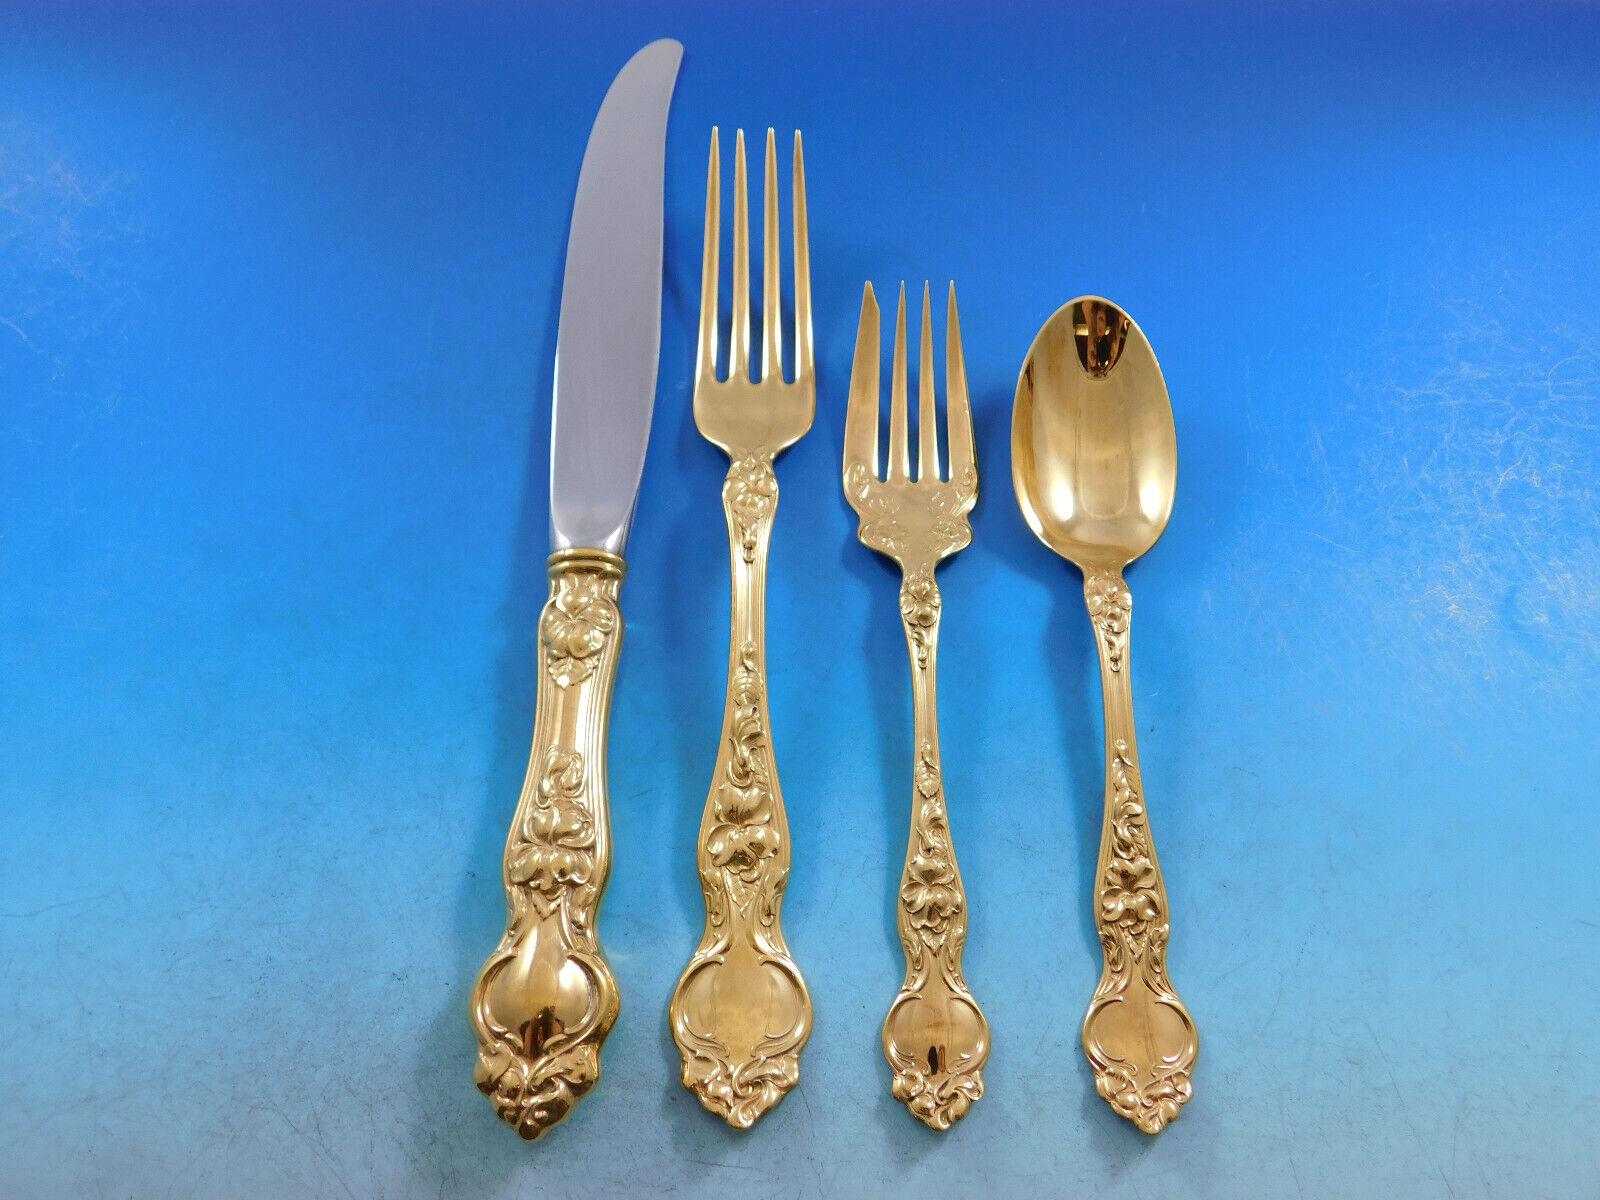 Superb Dinner Size Violet Gold by Wallace Sterling Silver Flatware set - 61 pieces. This set is vermeil, completely gold-washed over sterling silver. This set includes:

12 Dinner Size Knives with Modern stainless blades, 9 7/8